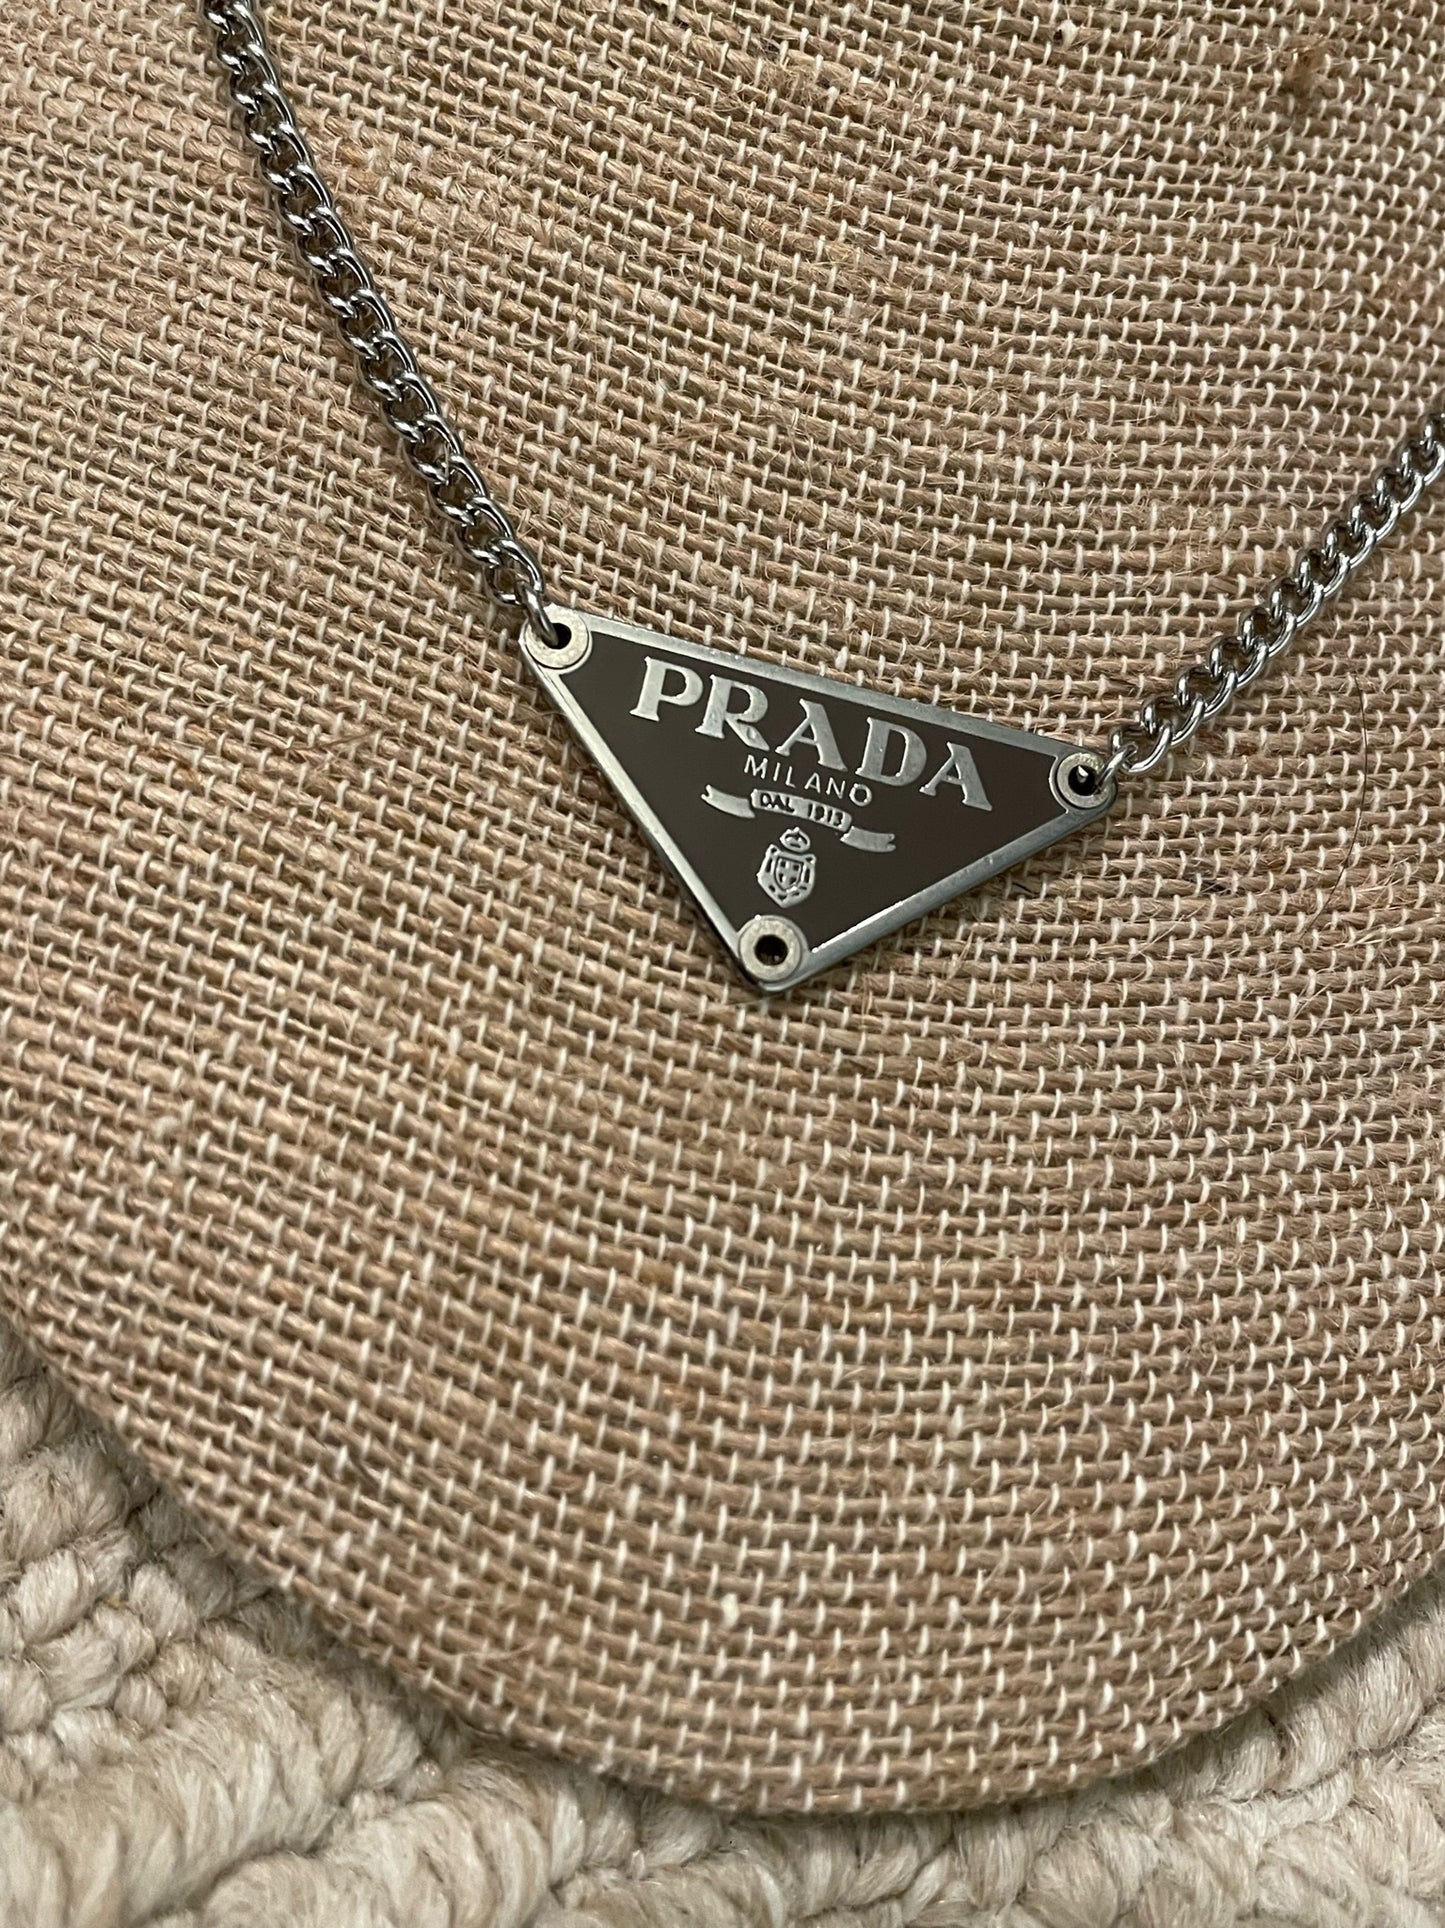 Prada Triangle Plate Charms on Necklaces